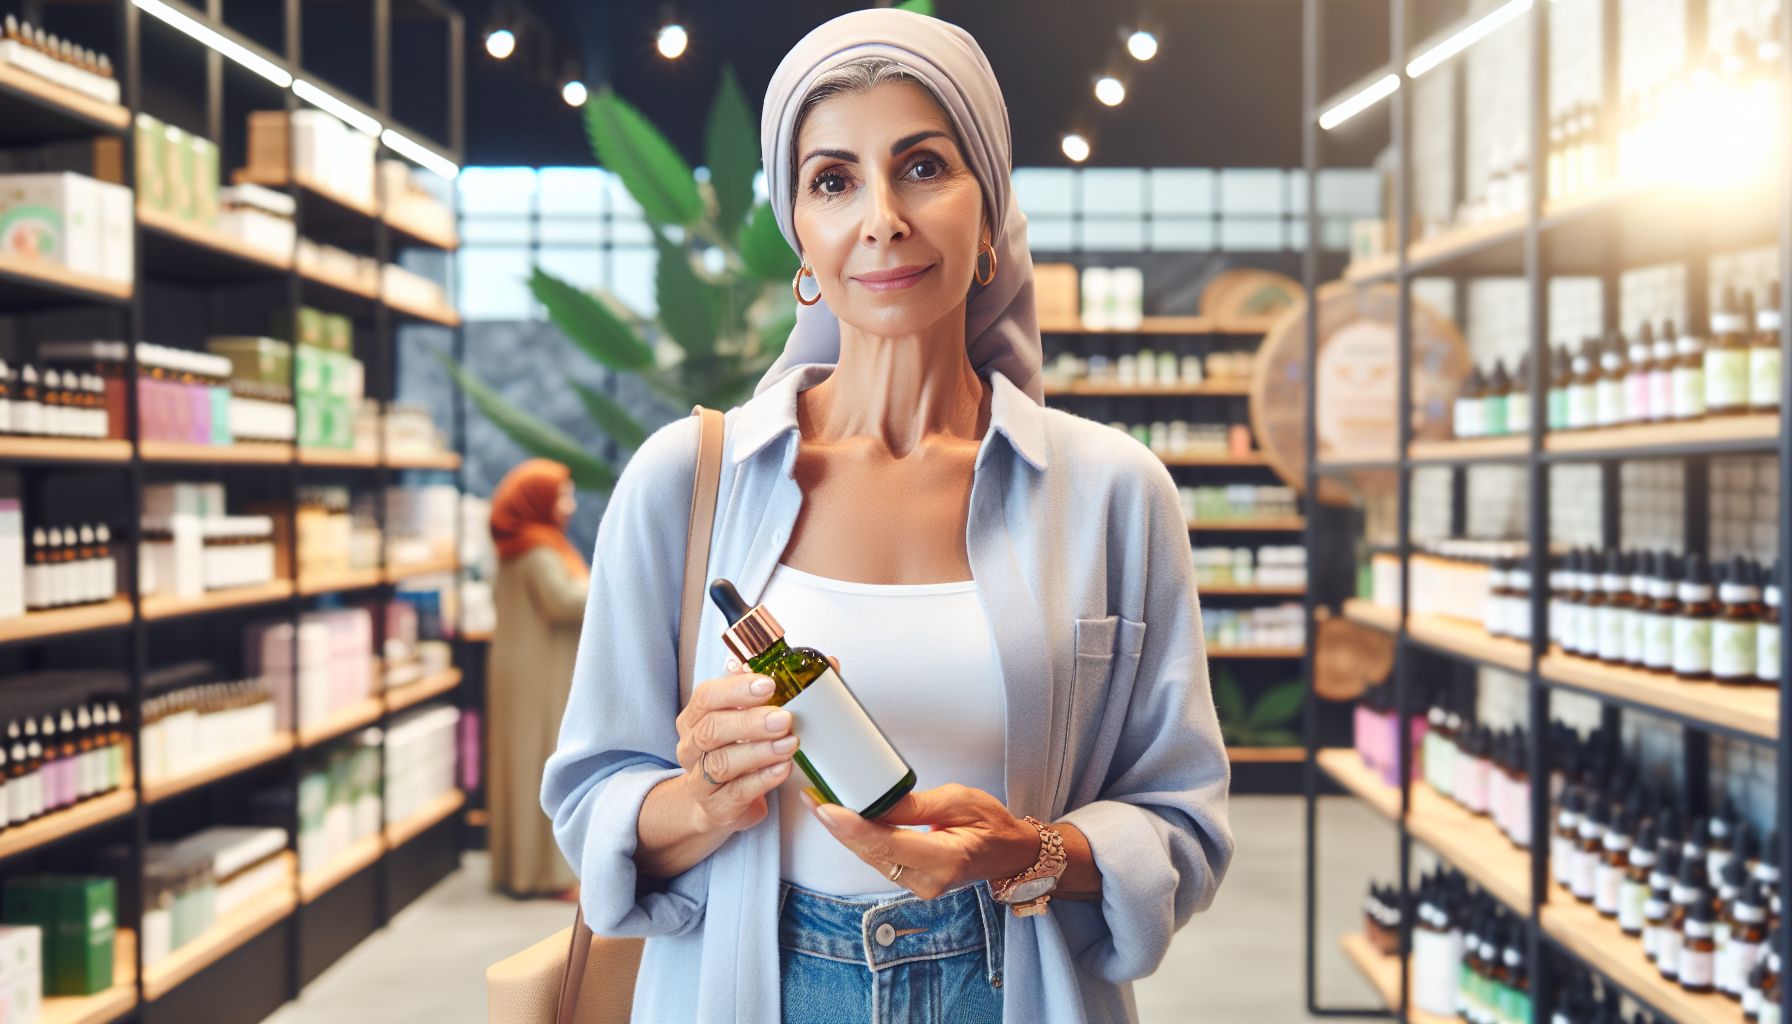 CBD Oil: The New Wellness Trend for Middle Aged Women